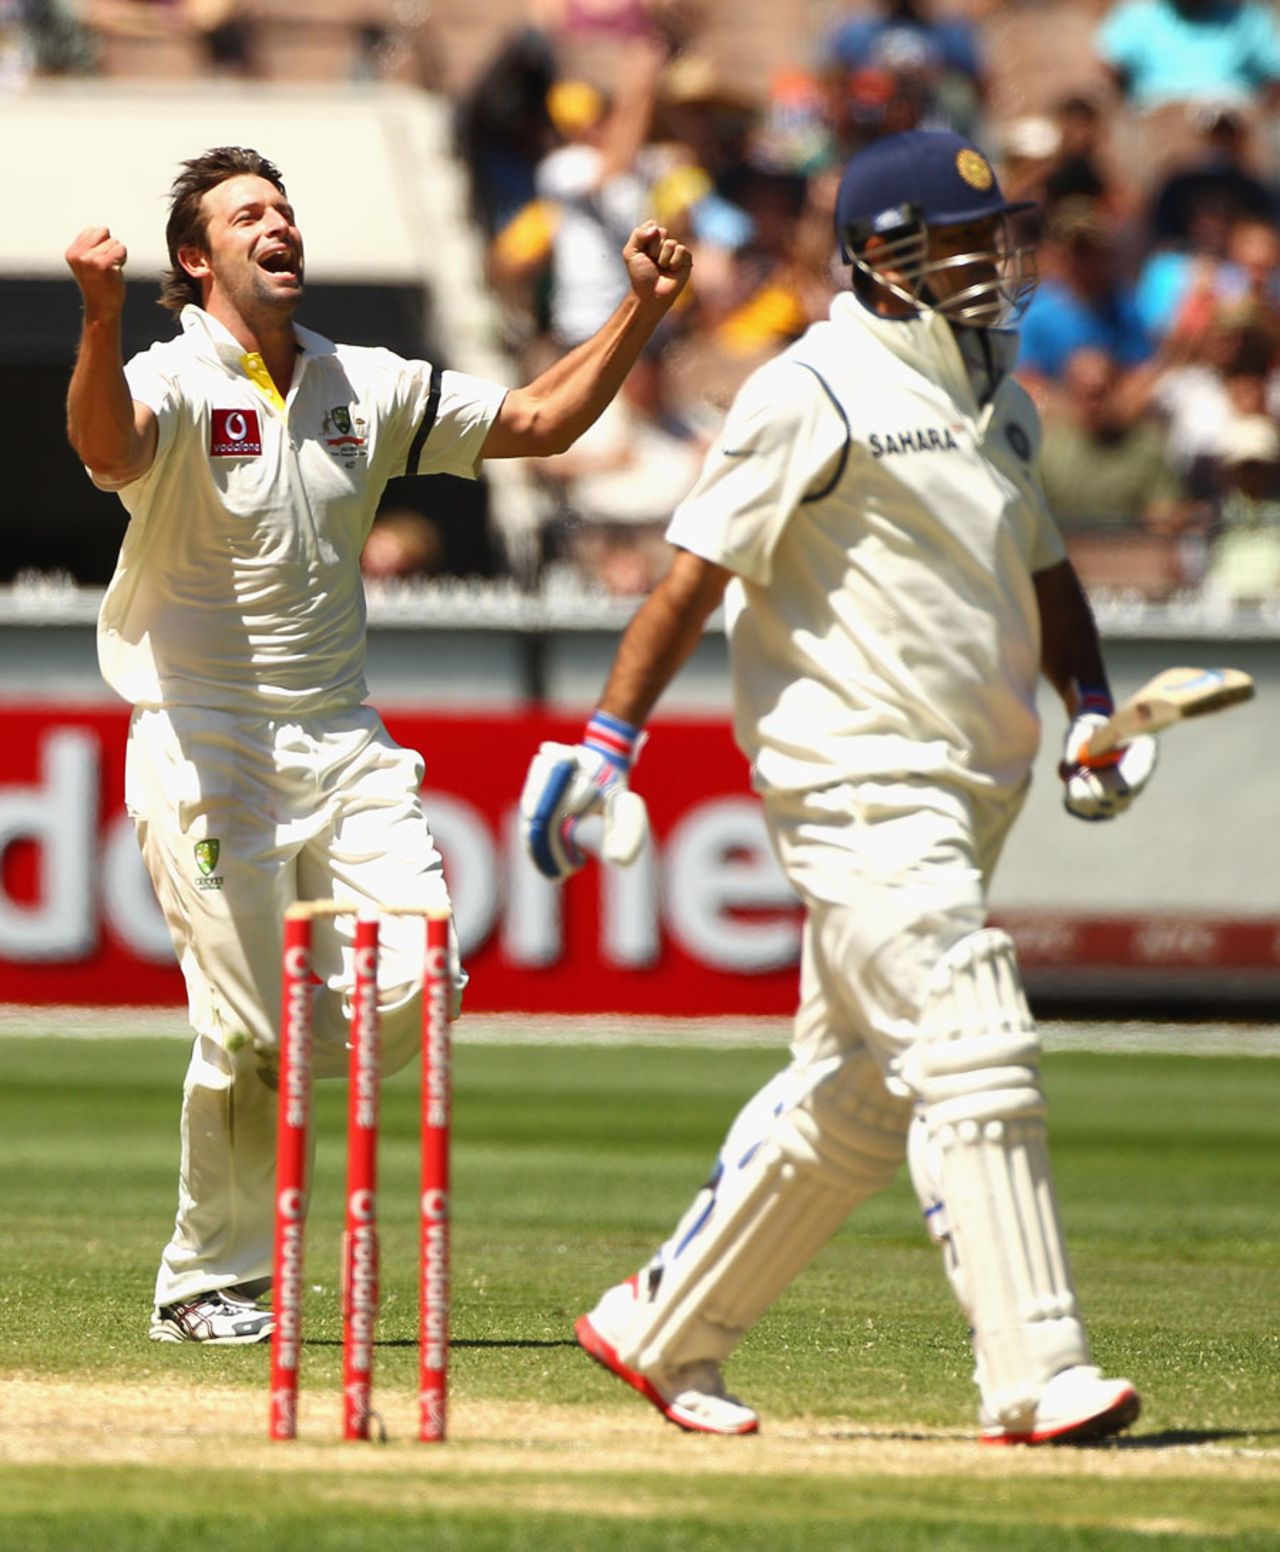 Ben Hilfenhaus had MS Dhoni nick to gully, Australia v India, 1st Test, Melbourne, 3rd day, December 28, 2011